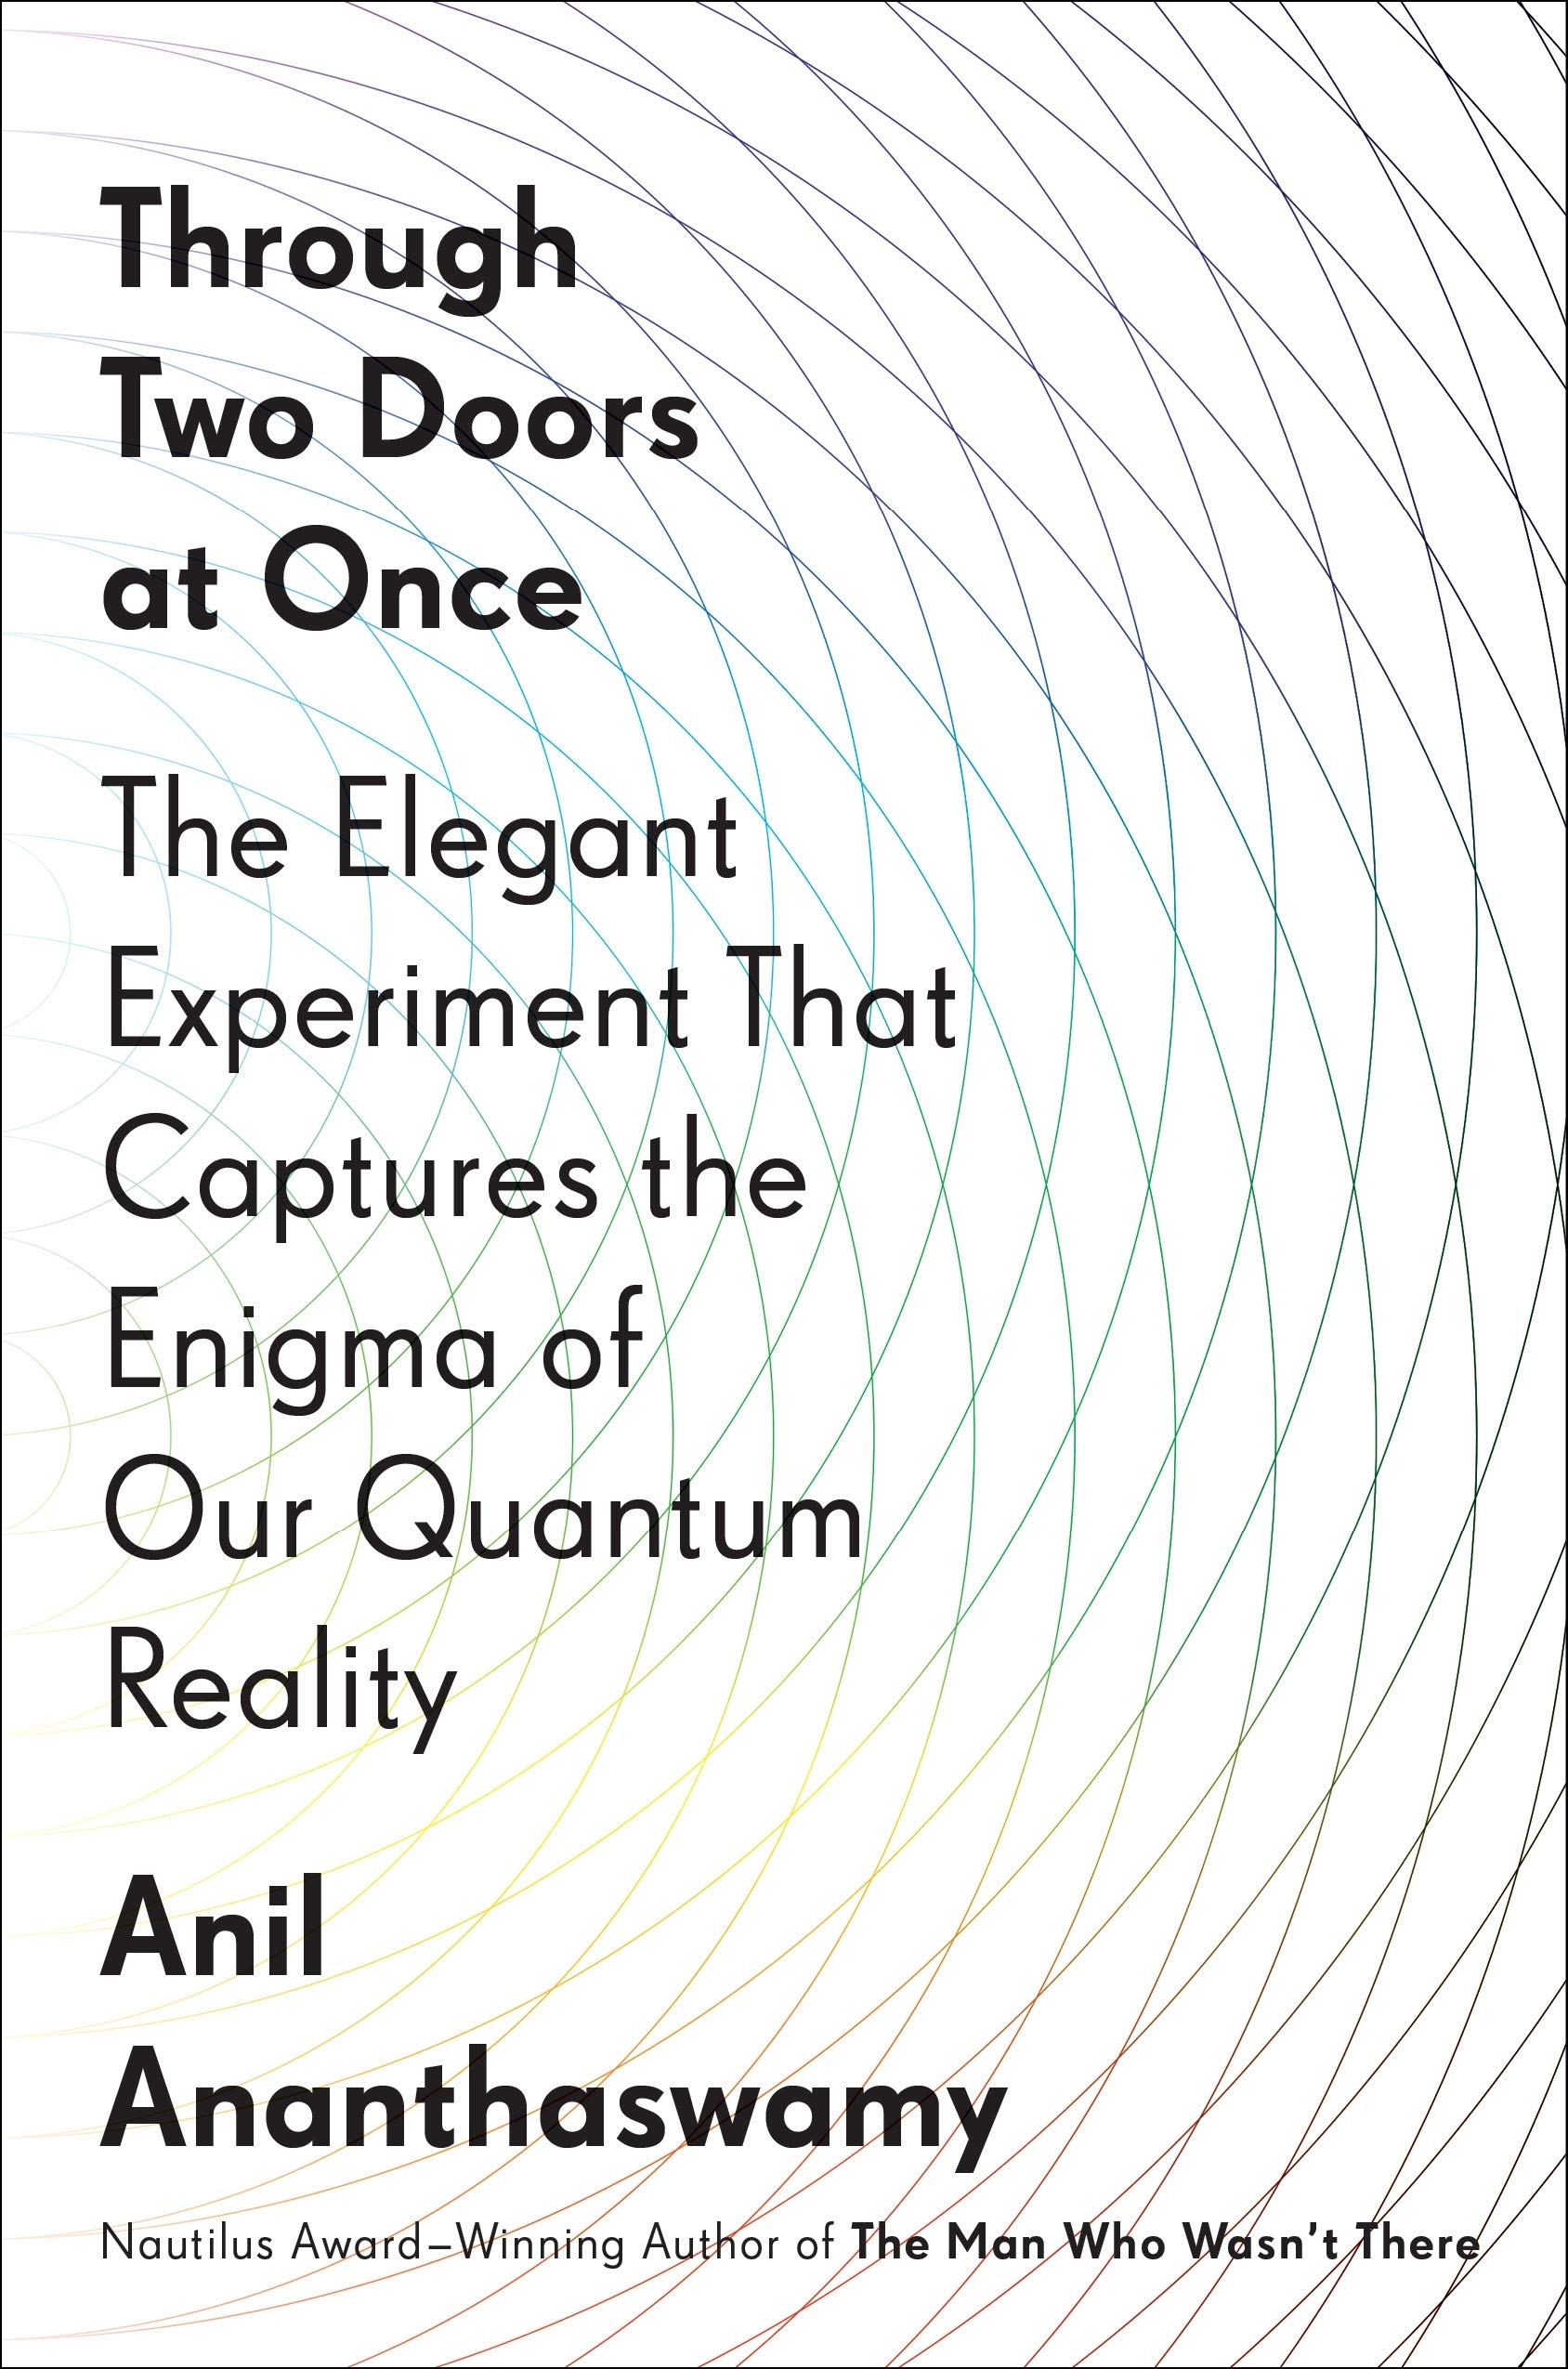 Through Two Doors at Once (2019, Penguin Publishing Group)